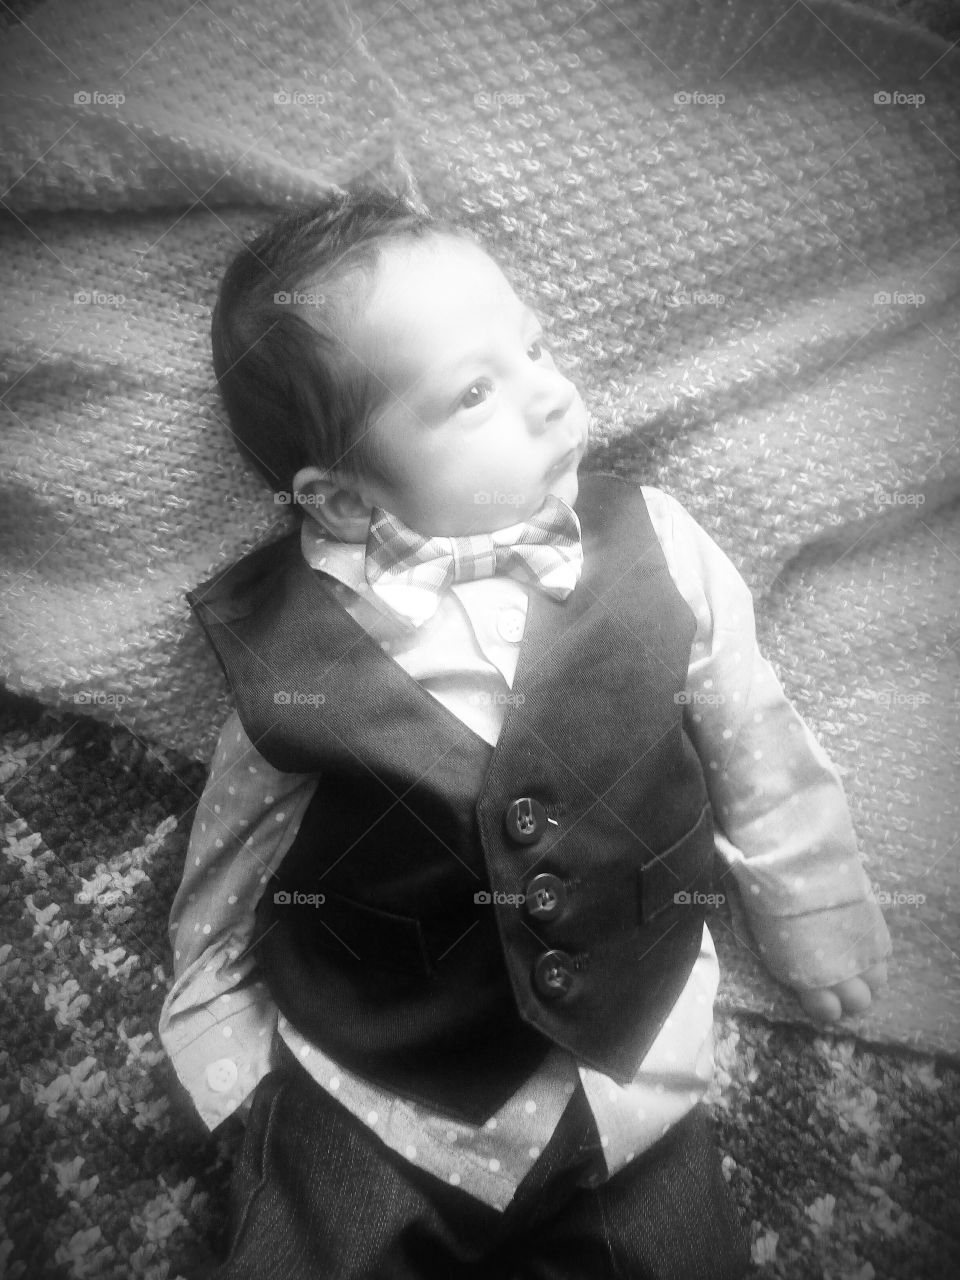 Suited up and ready for His 1 Month Photo.